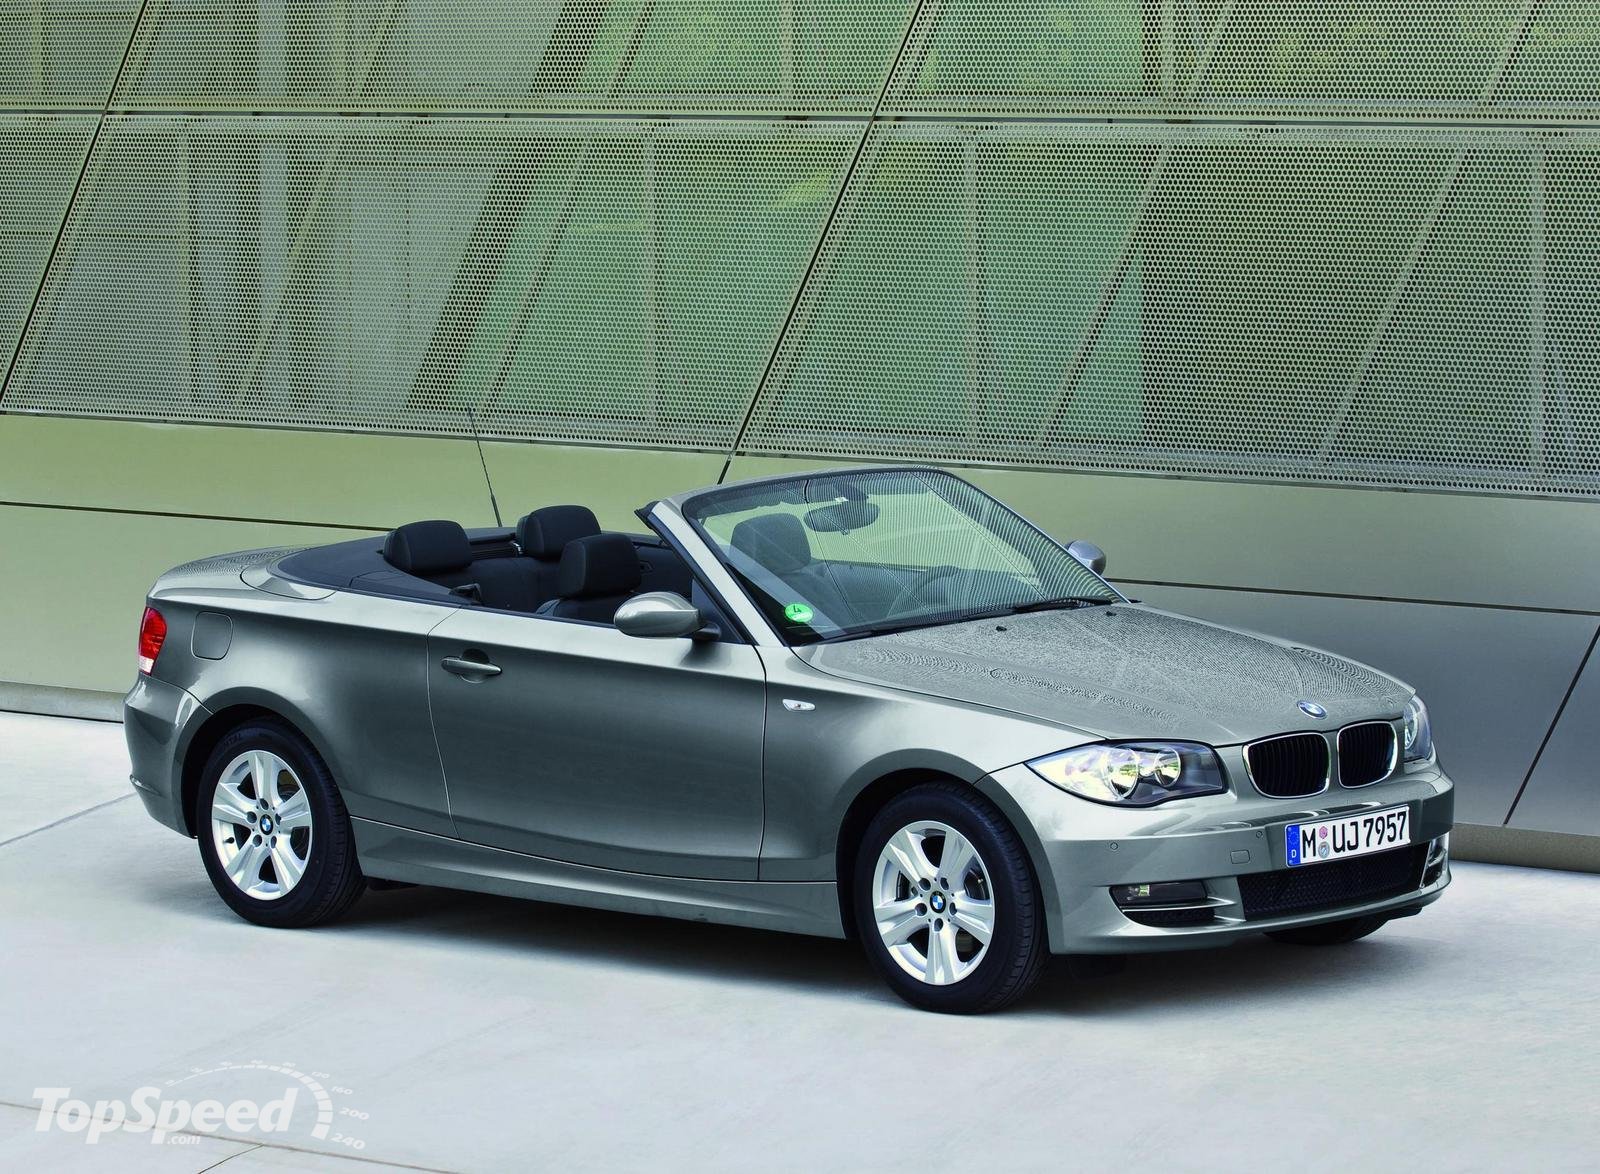 The best cars: BMW 1-Series